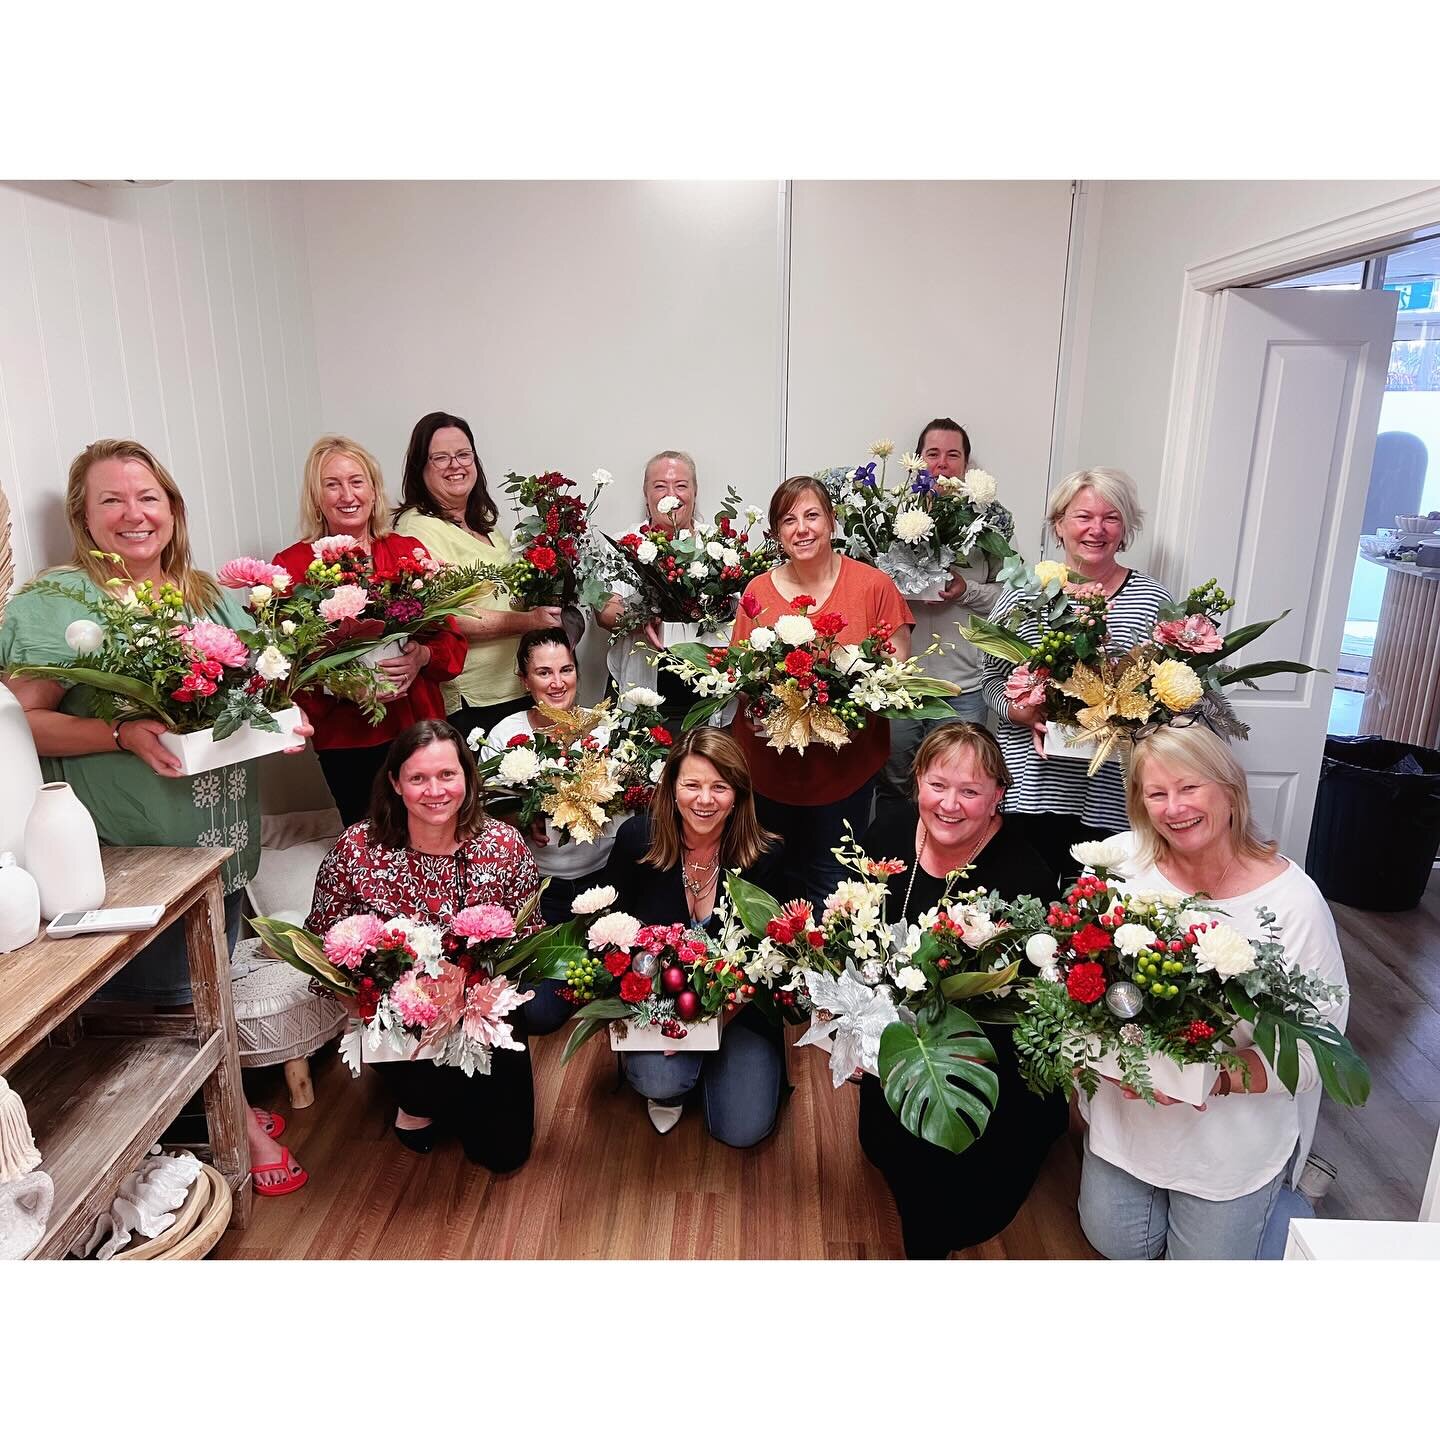 What a great night we all had last night!

A Christmas floral workshop with yummy Prosecco to drink and amazing grazing food prepared by @regniercakes to nibble on. 

A great gift idea for Christmas, we can organise a gift voucher for you. We can do 